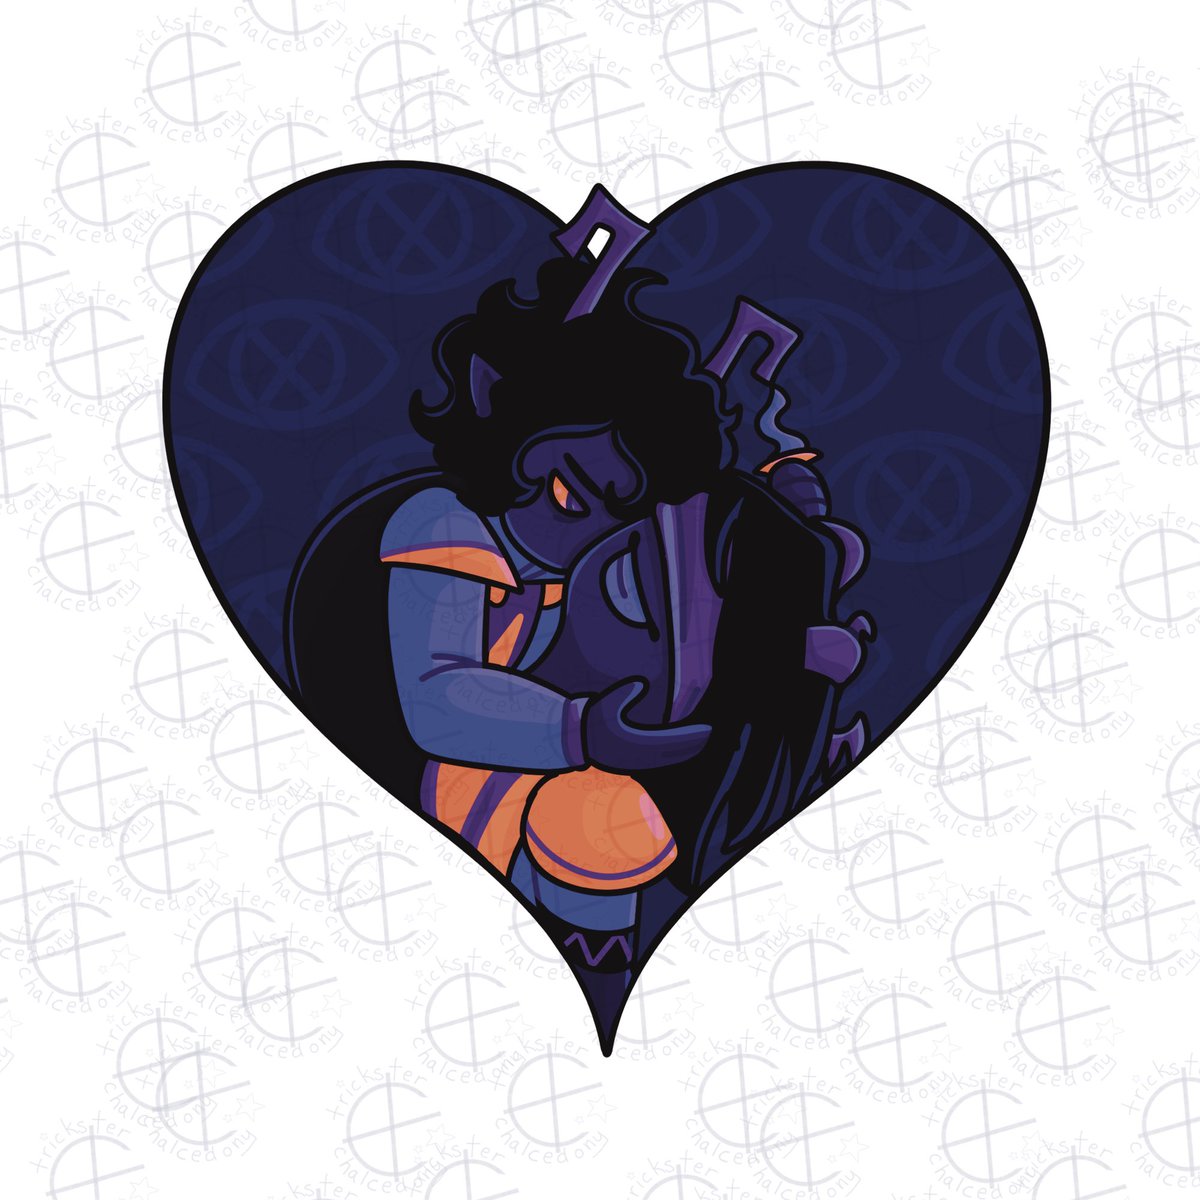 the art card and the charm! i forgot to out the charm into cmyk so the colors are duller but i wouldn't be able to print so bright anyway #vasterror #sendolo